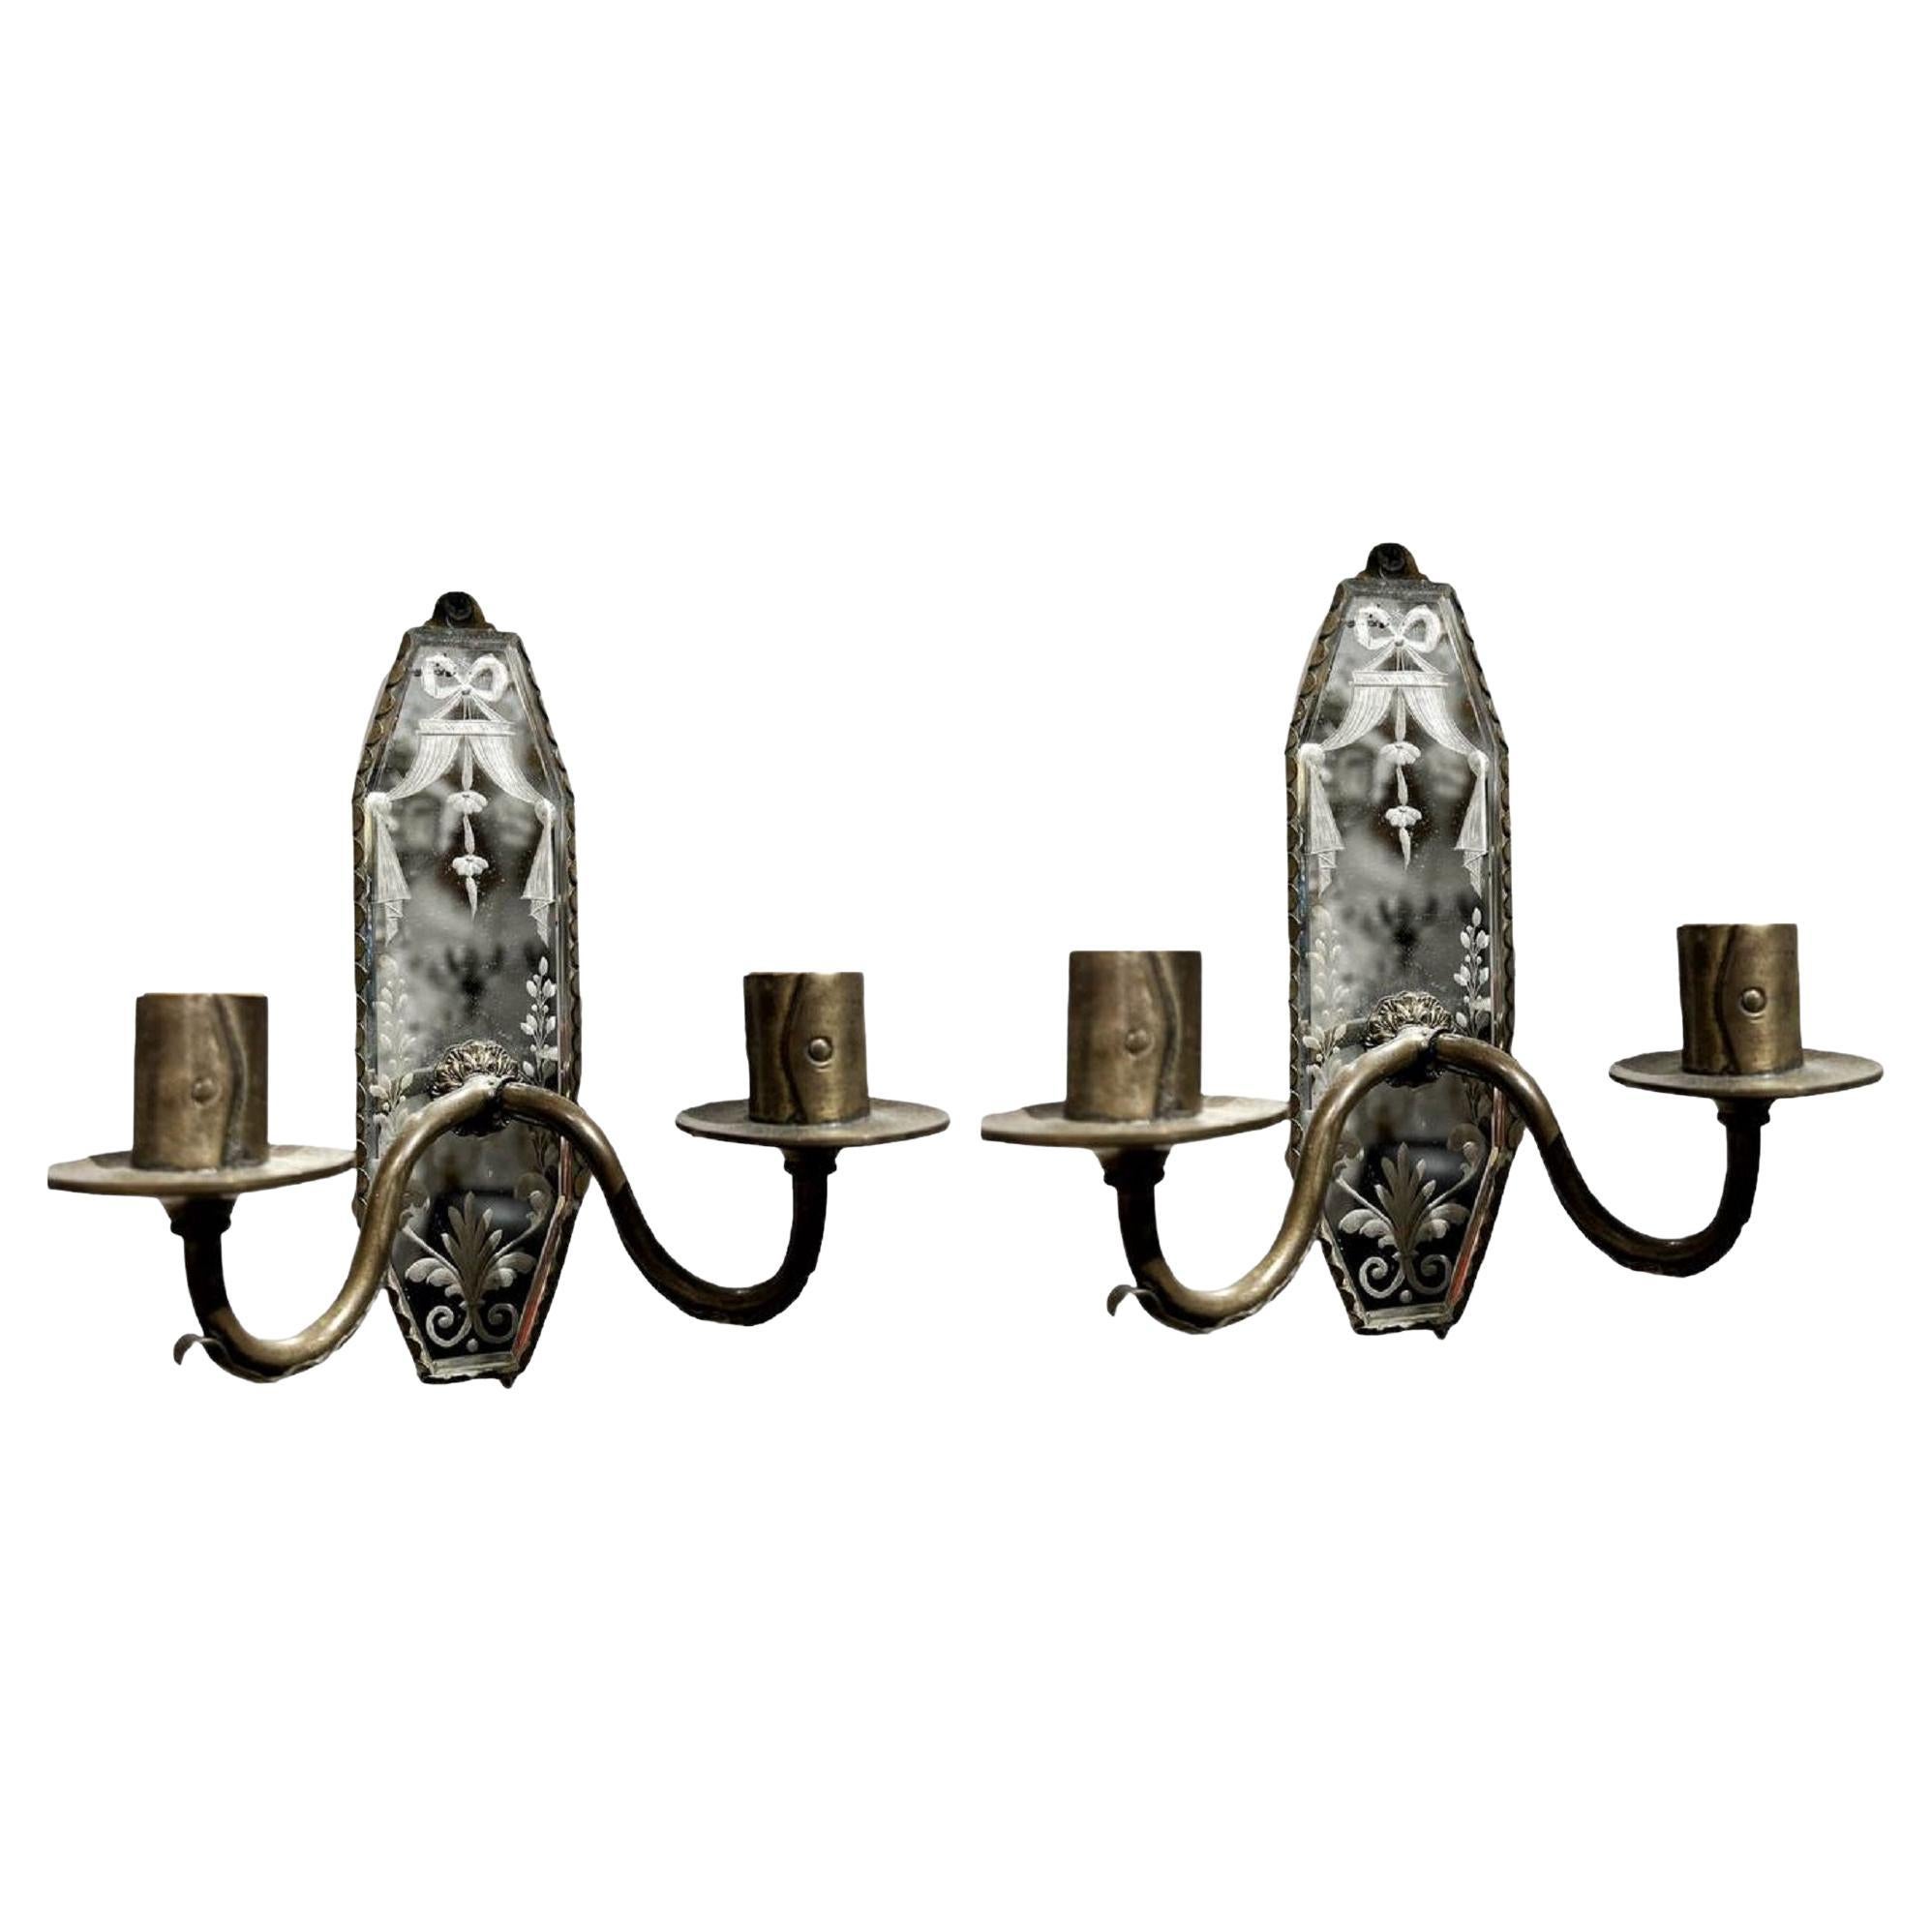 1920’s Small French Etched Mirrored Sconces For Sale